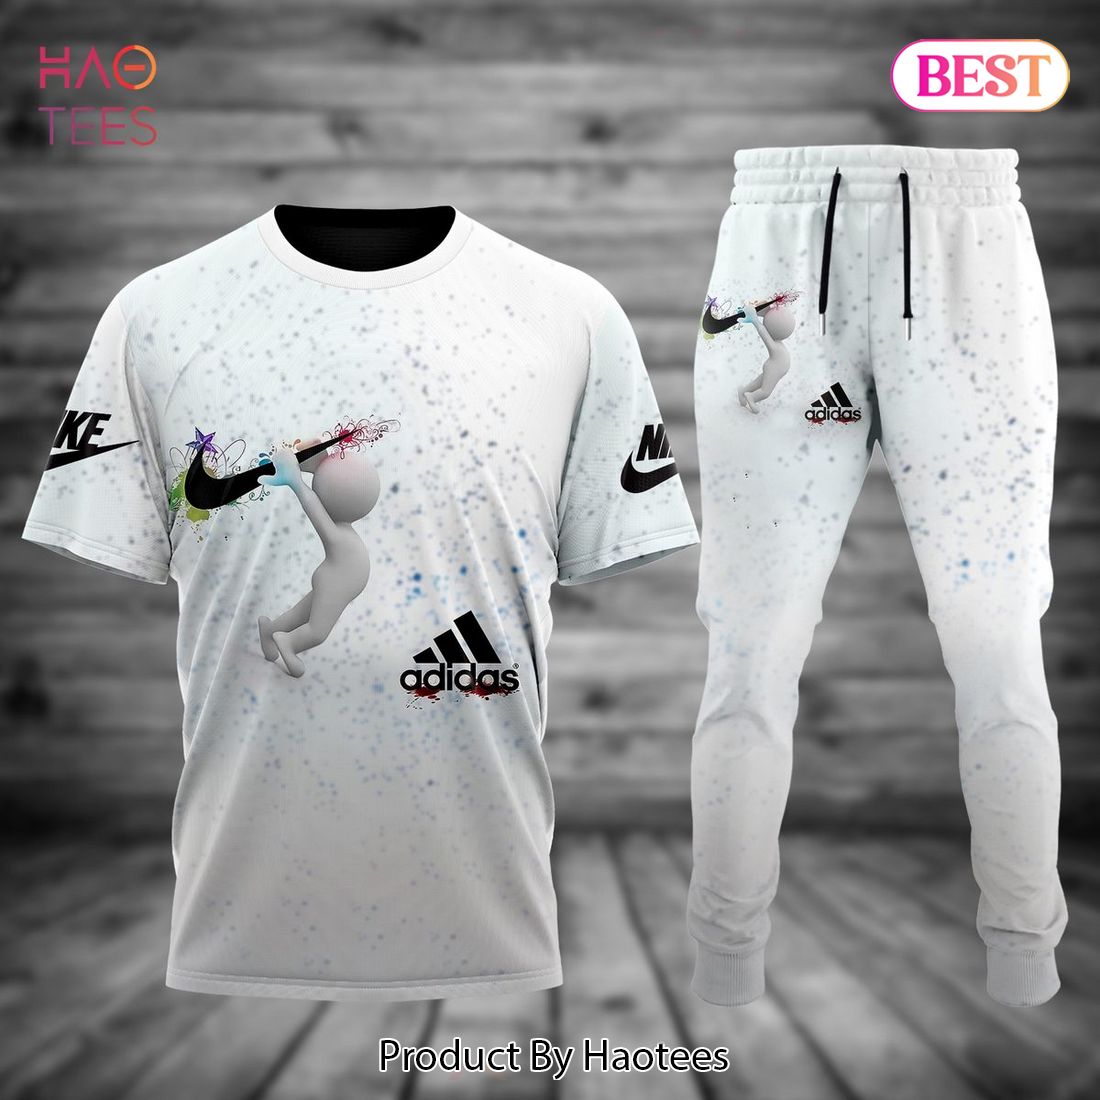 BEST Nike White Mix Logo Luxury Brand T-Shirt And Pattern Limited Edition